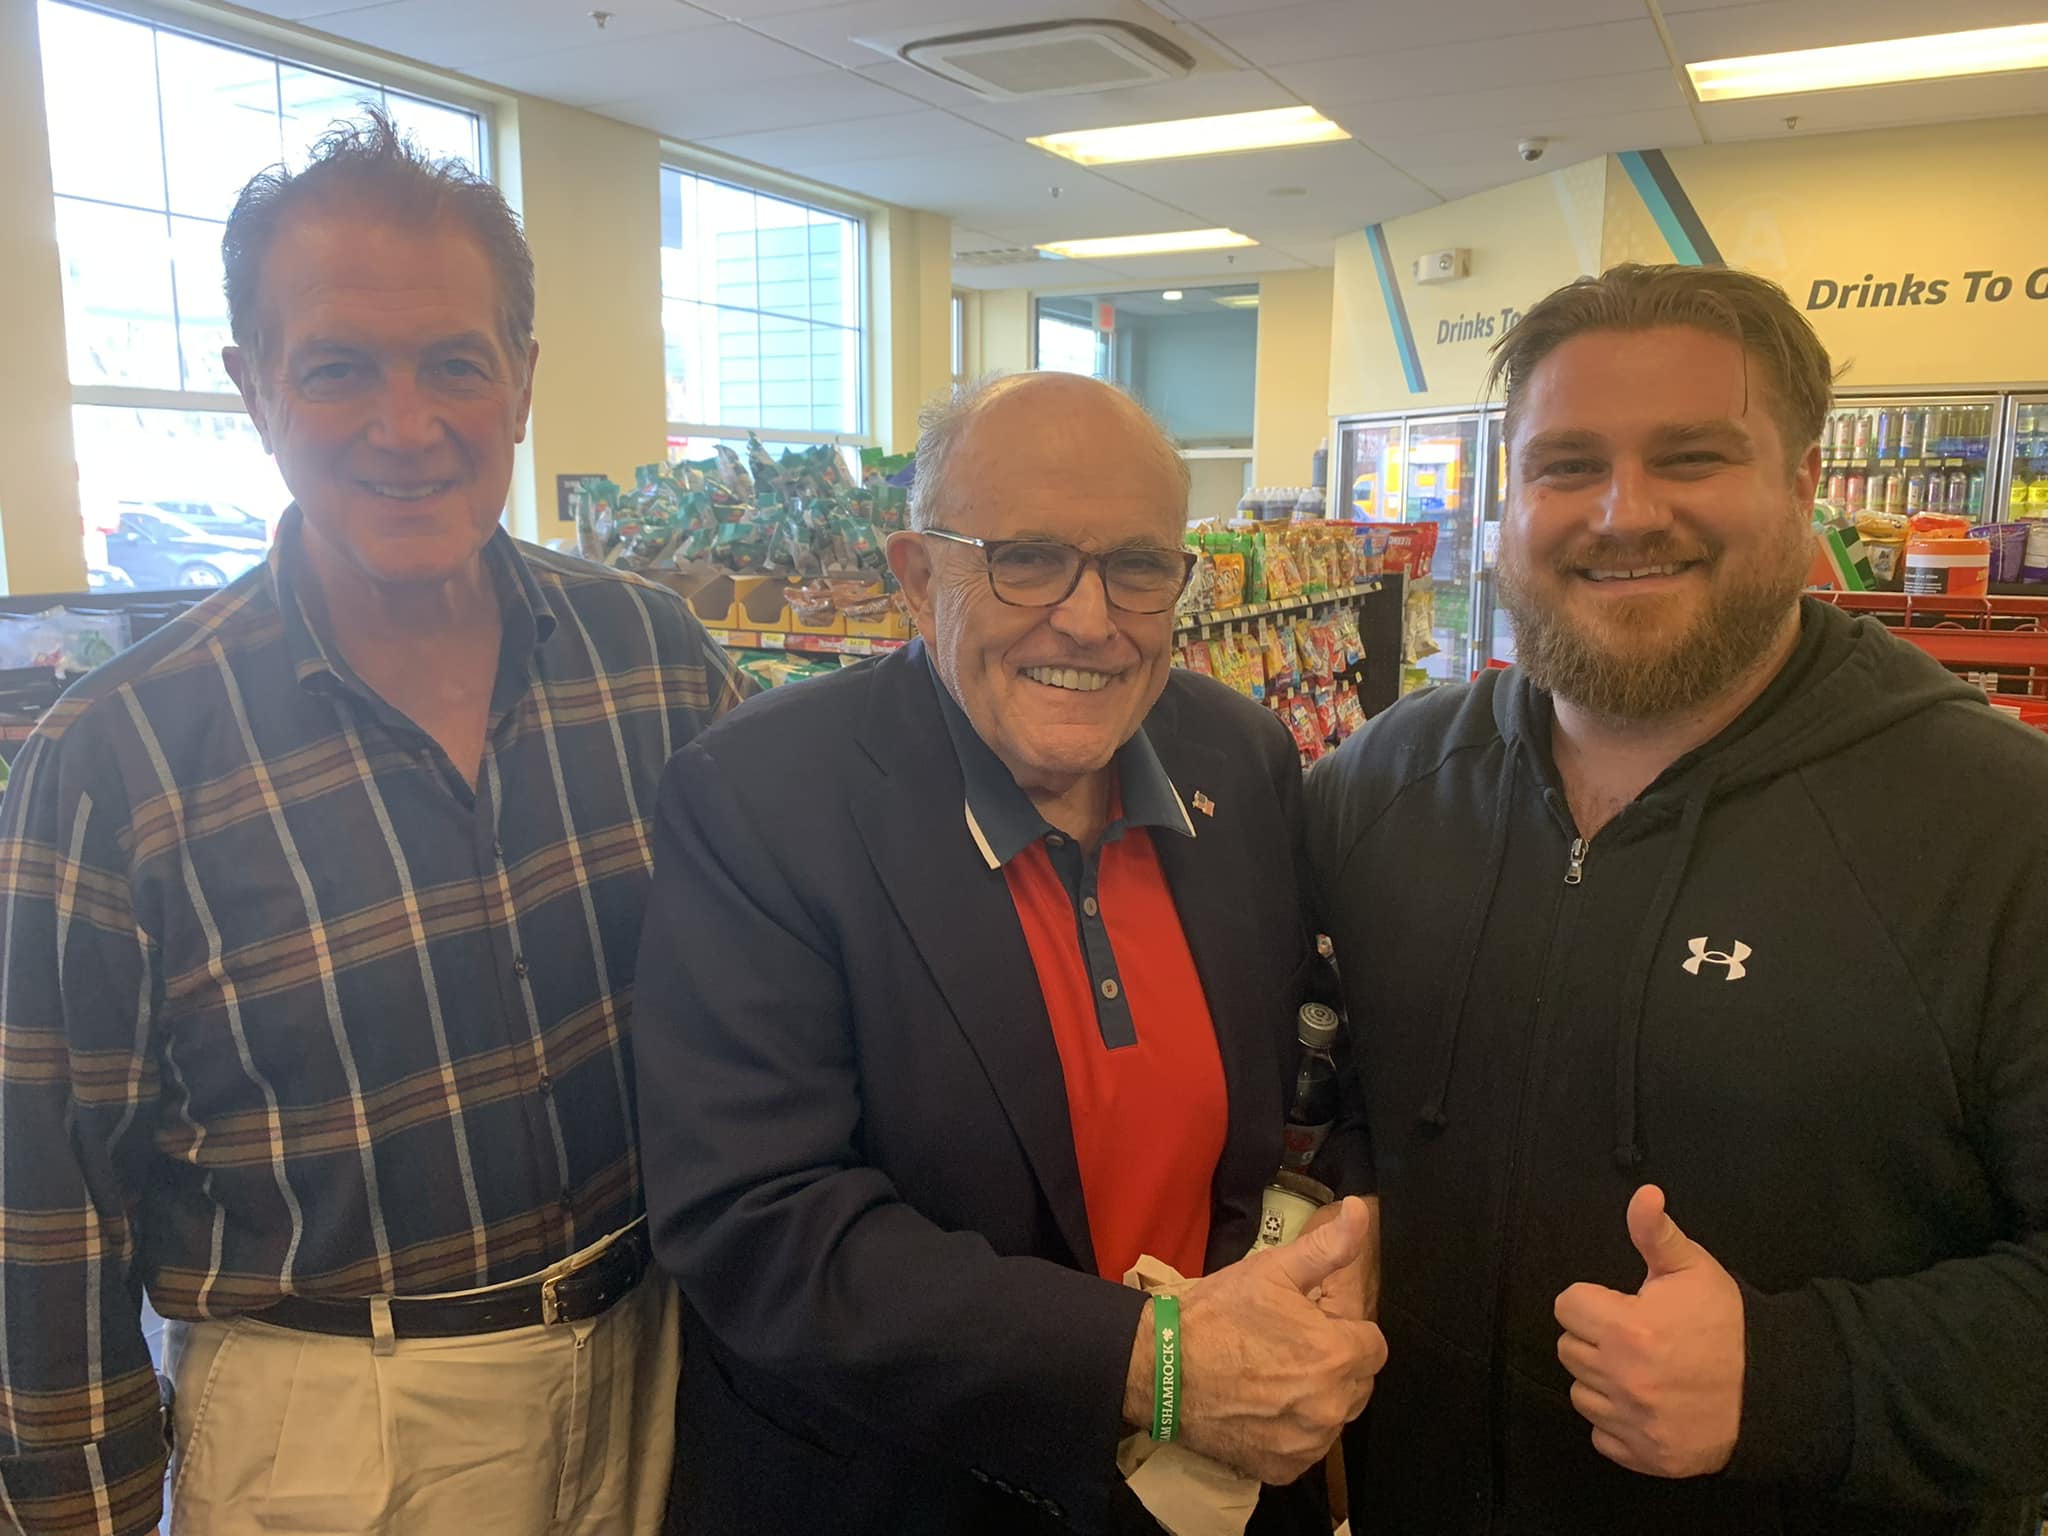 Rudy Giuliani spotted at Connecticut rest stop, meets two state politicians - CT Insider